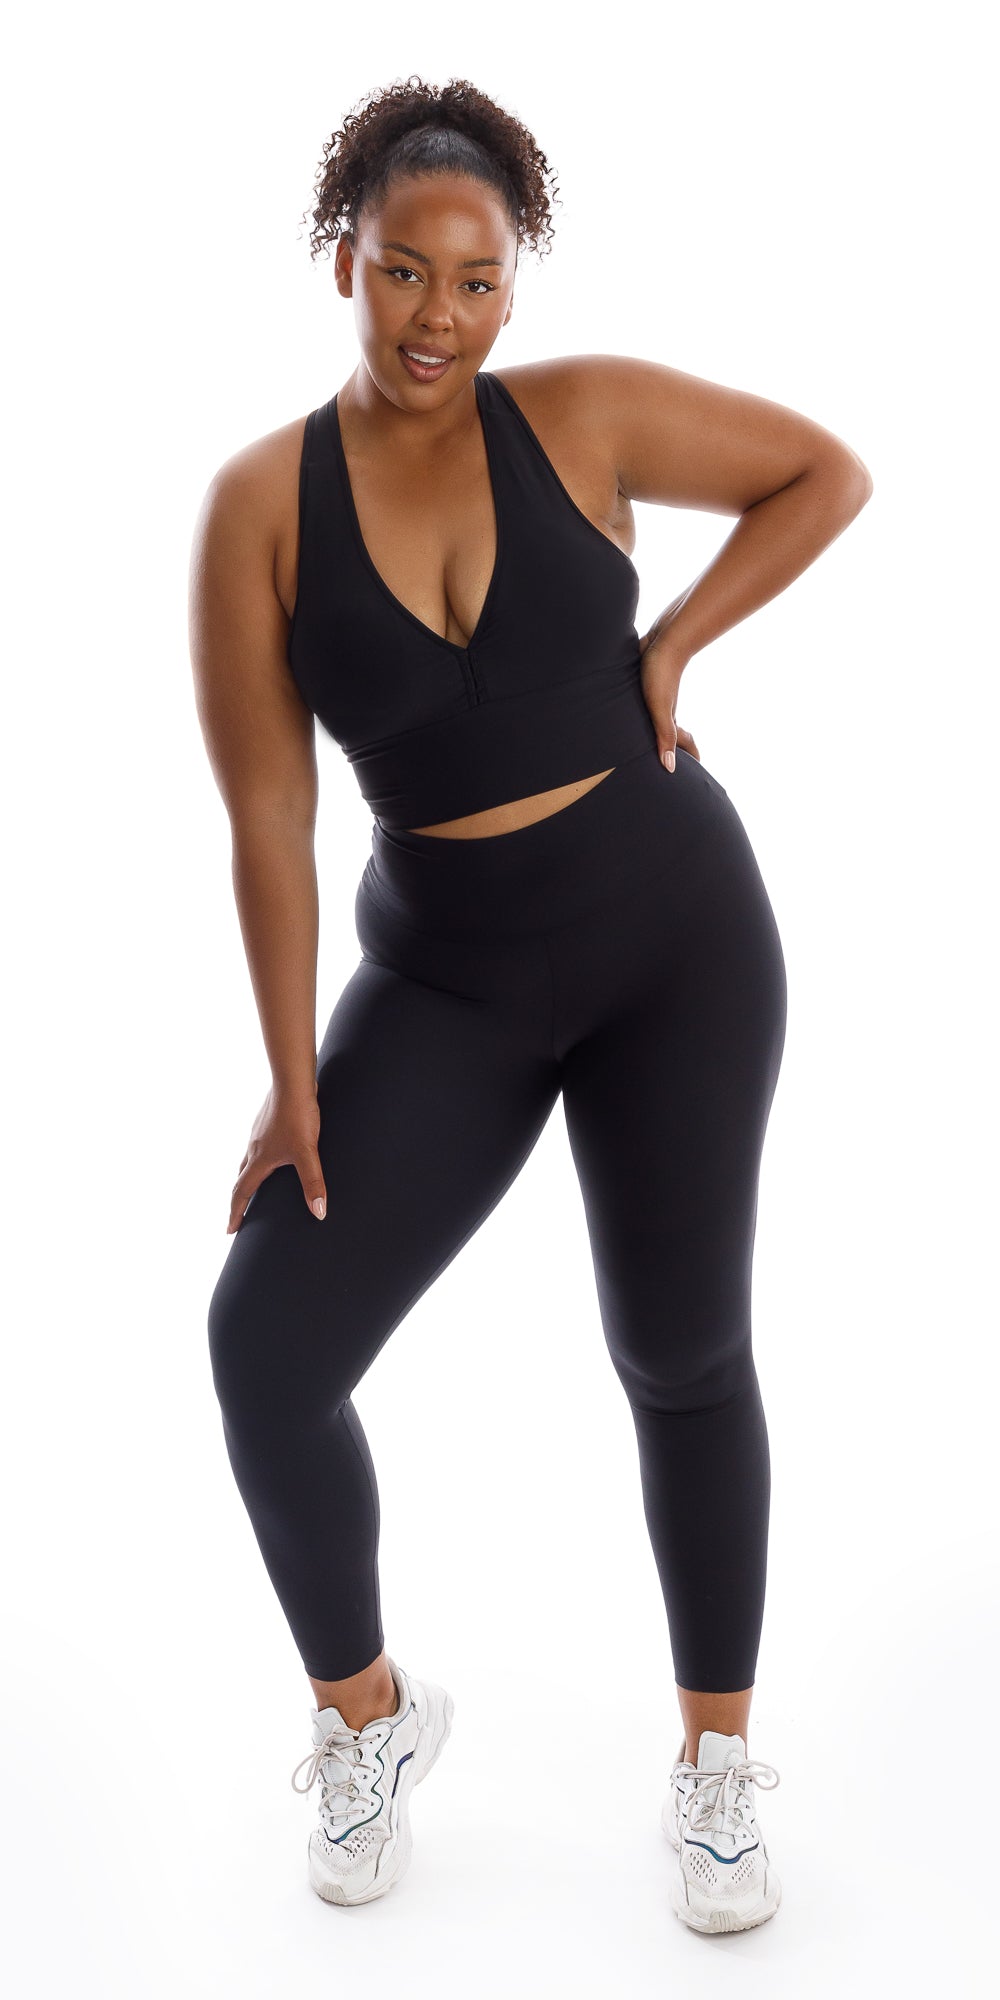 Full body front view of girl wearing black Midnight Eco Racer Back Bra and matching leggings putting one hand on waist and bending her right knee